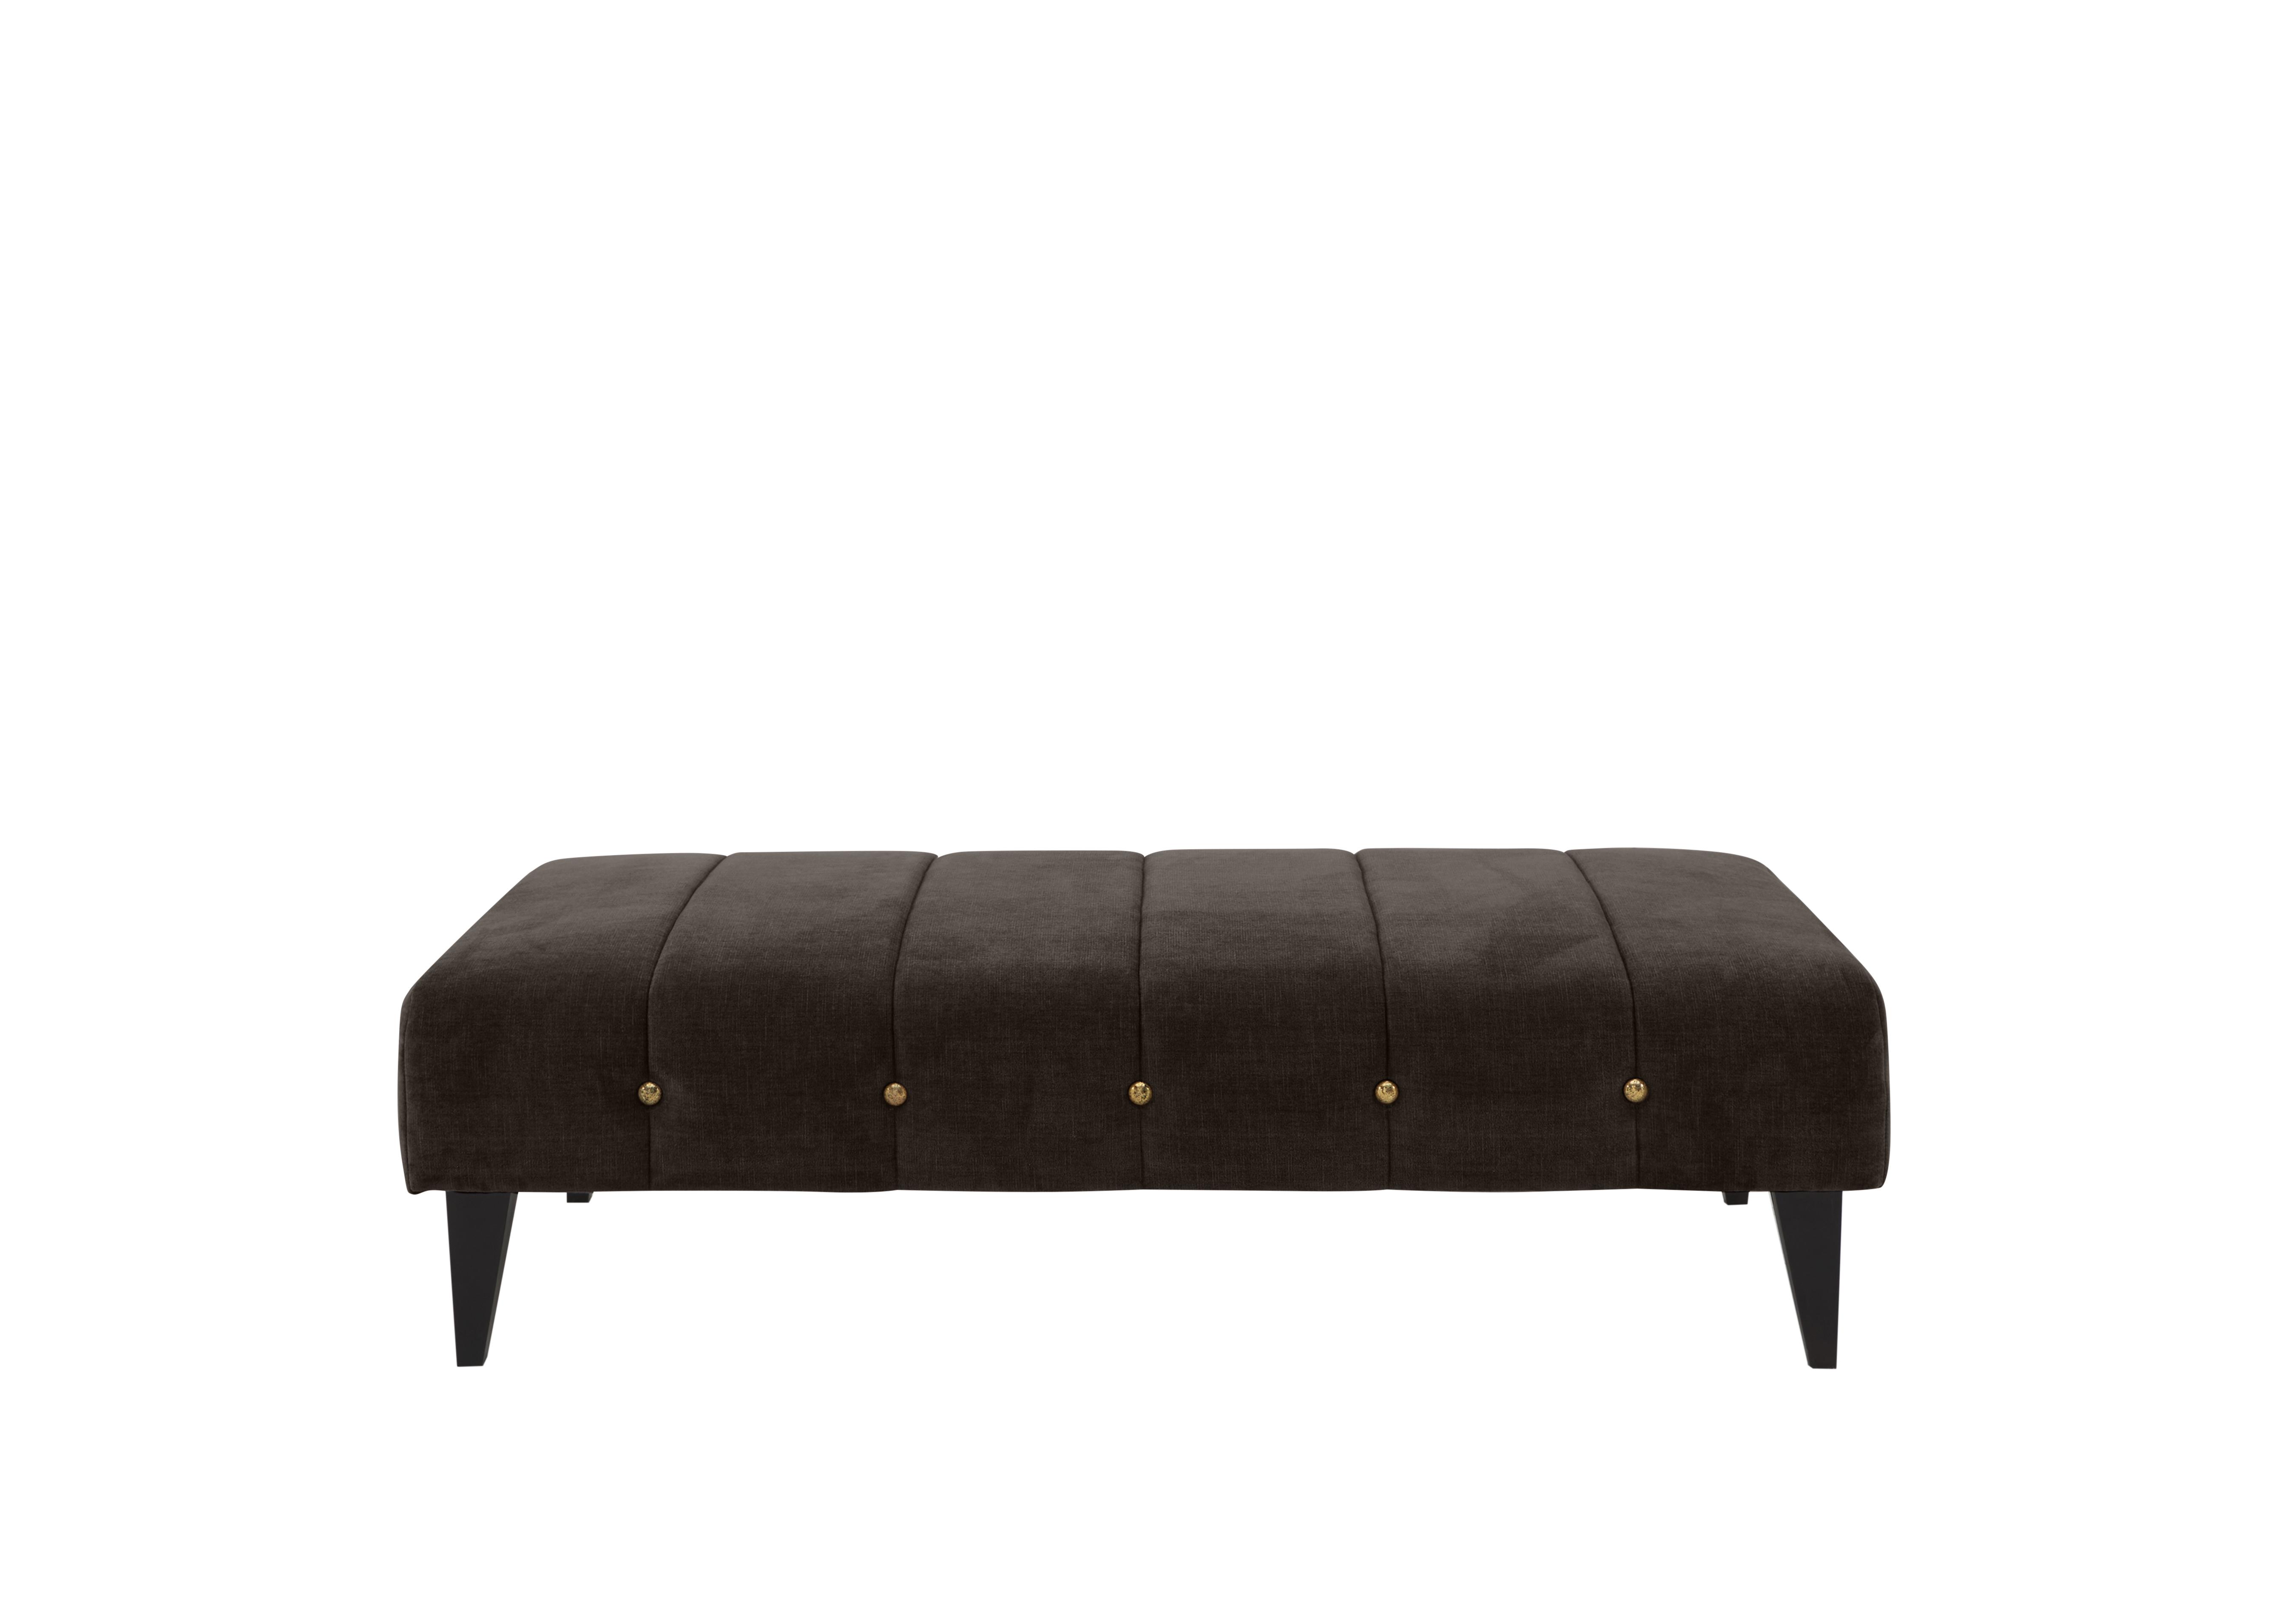 Sumptuous Fabric Bench Footstool in Chamonix Mocha Dk/Gold on Furniture Village